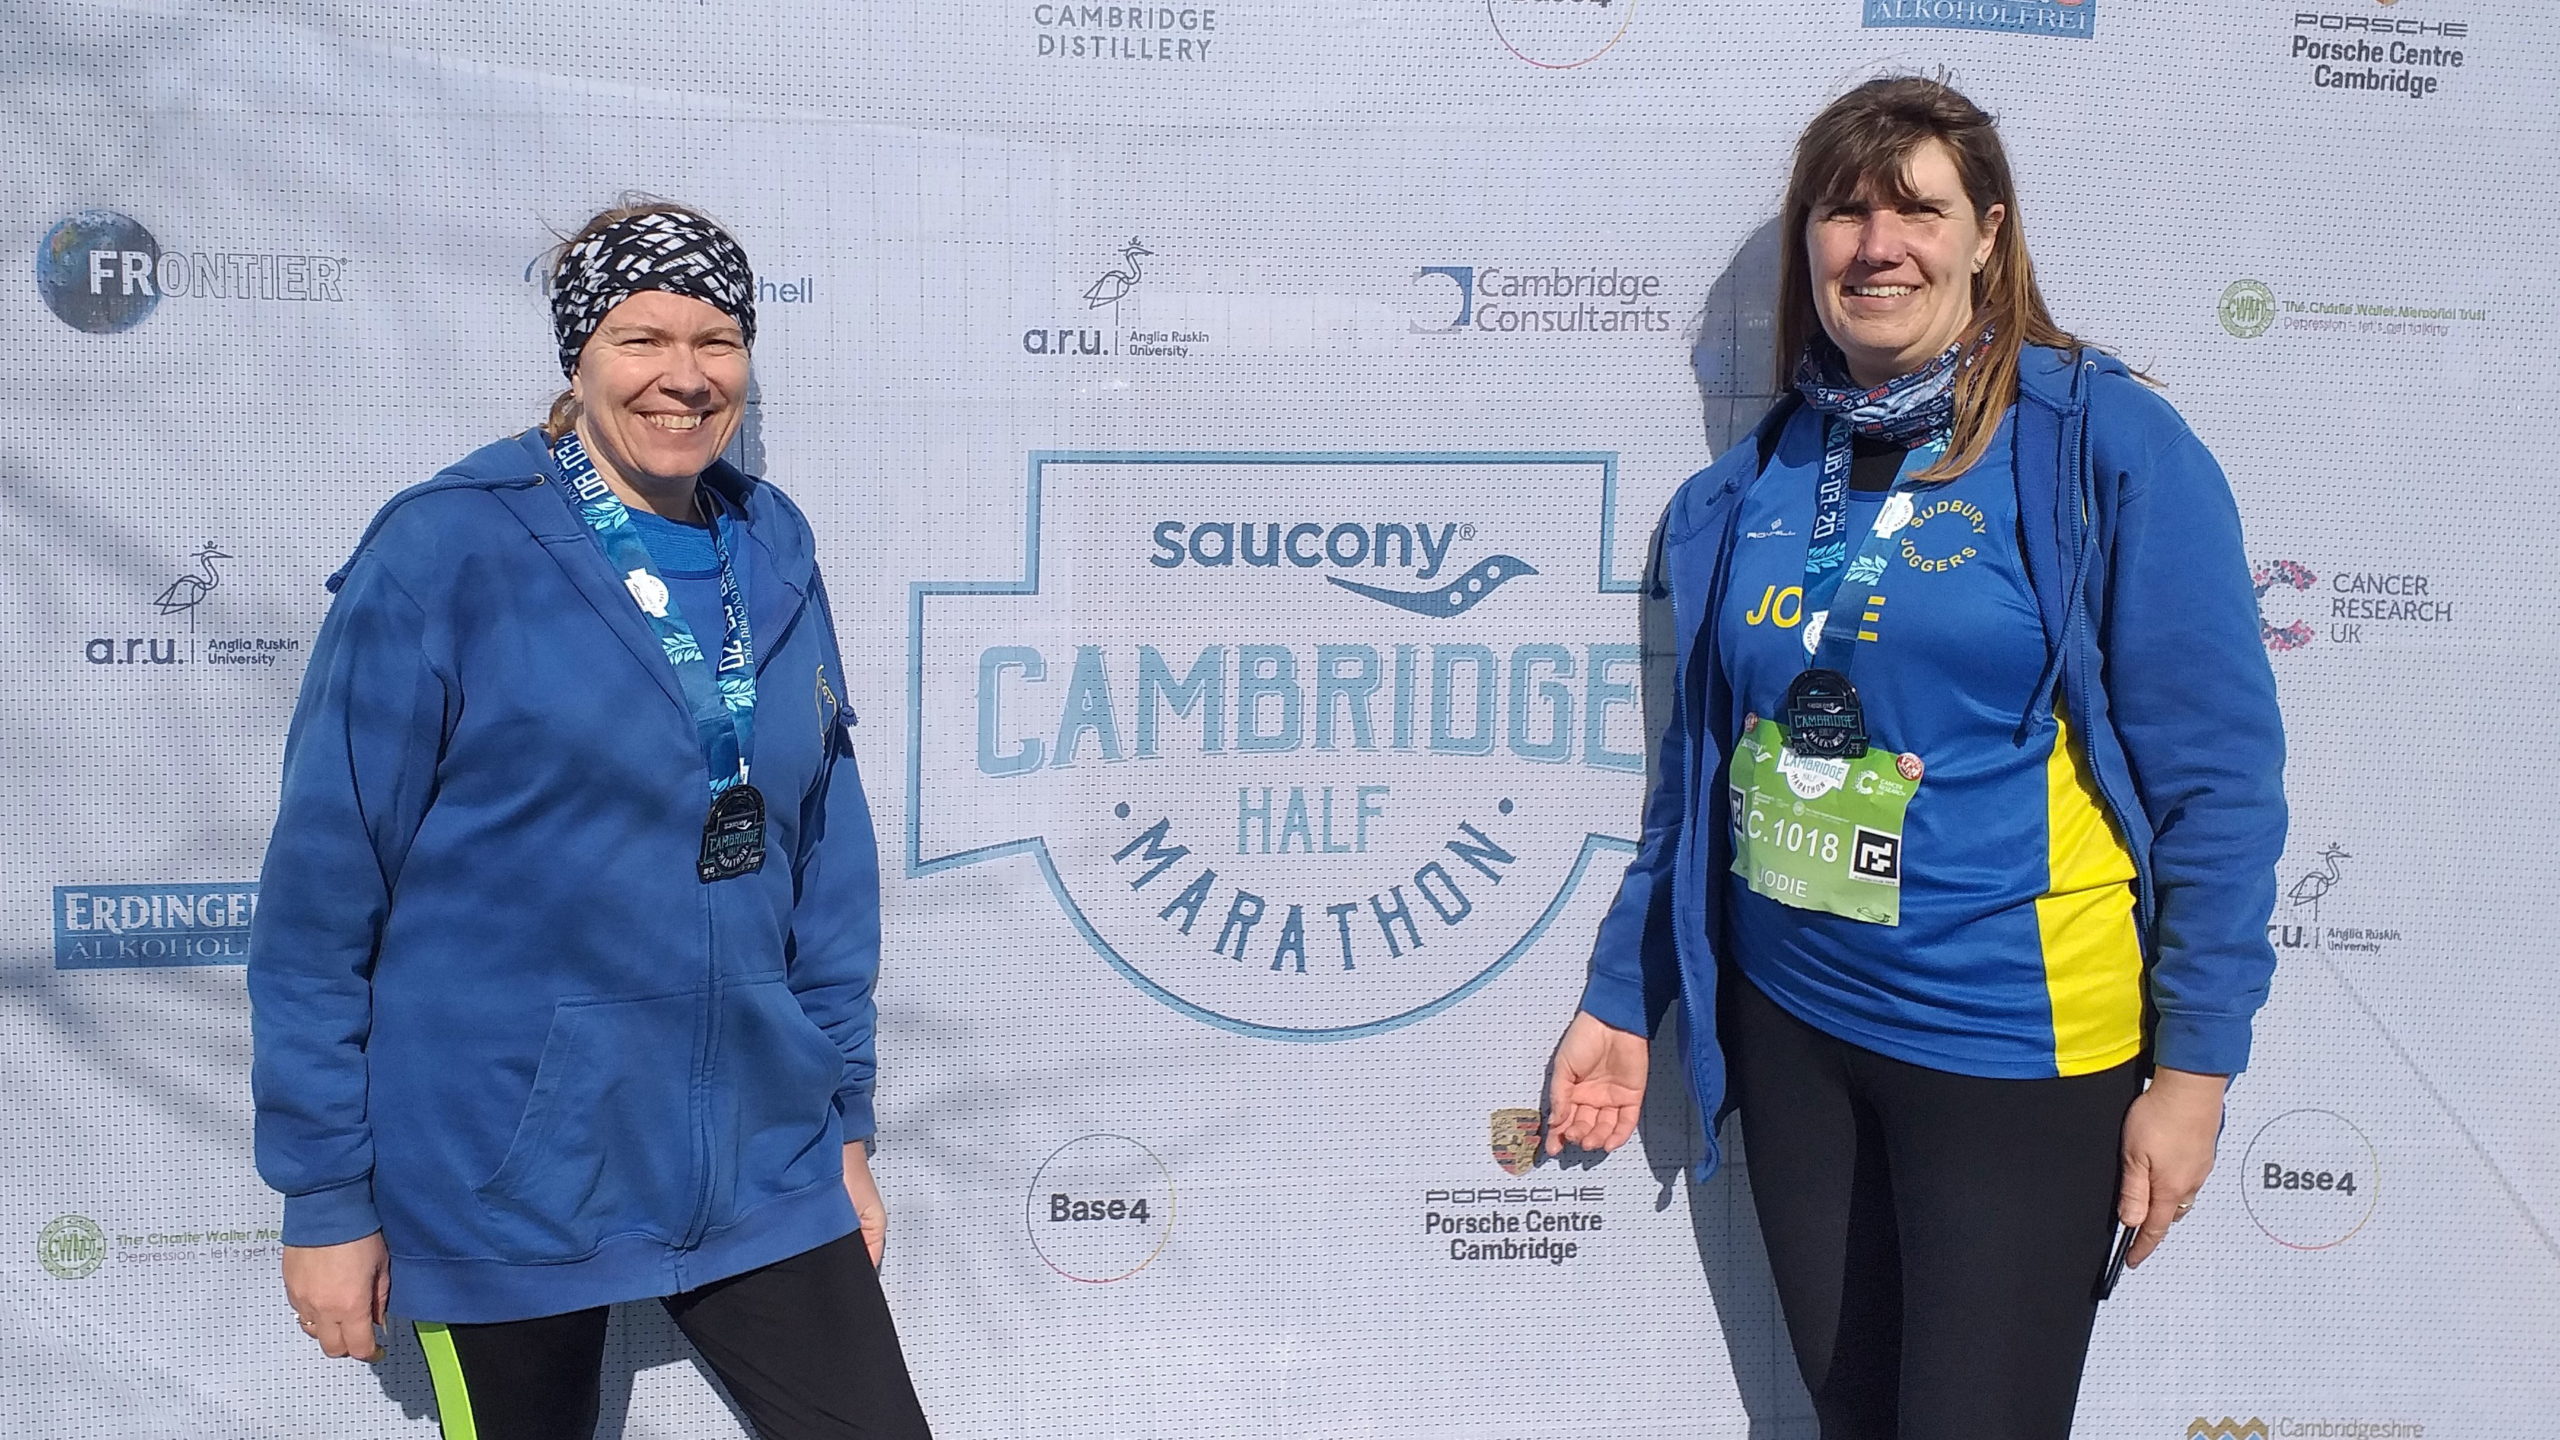 Claire Rooke (left) and Jodie Budd (right) after finishing the Cambridge Half Marathon.